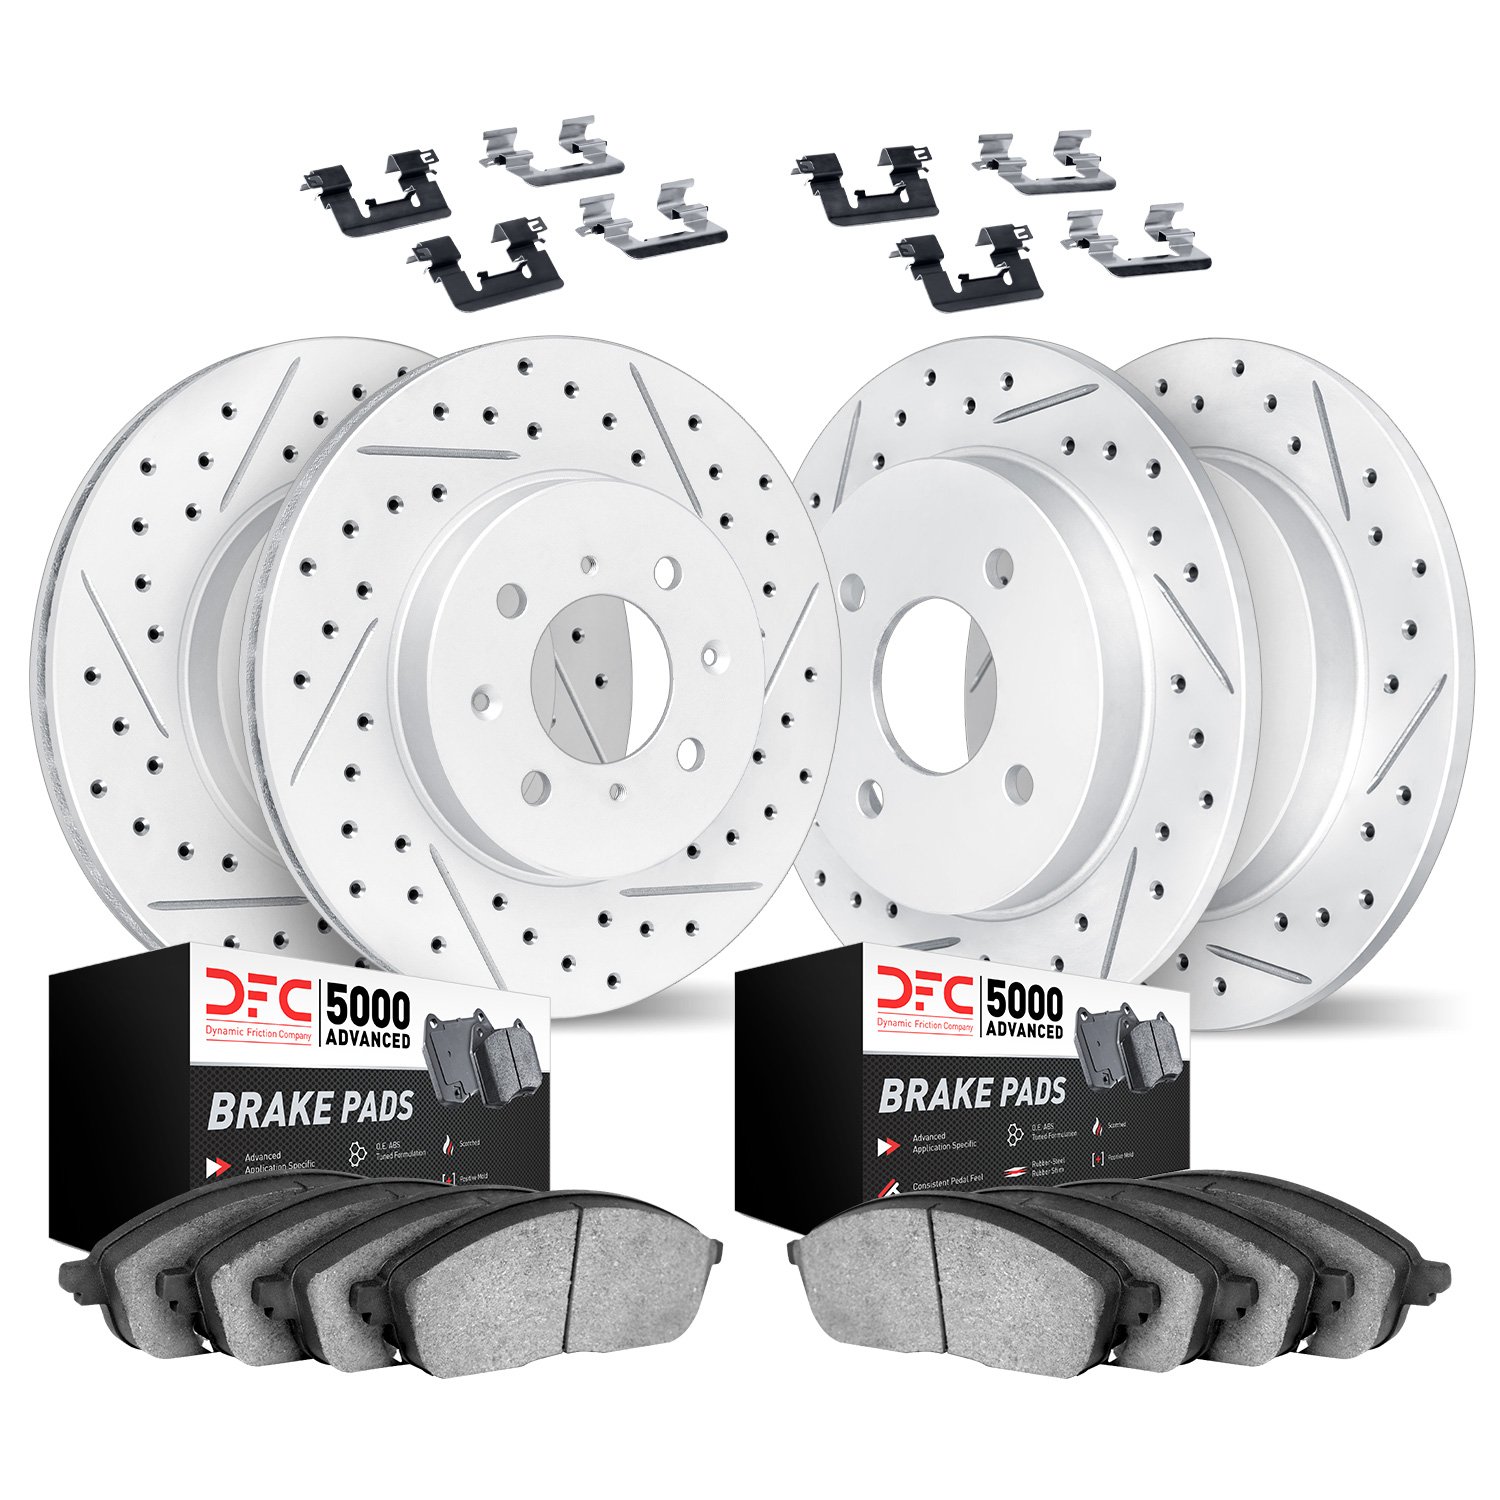 2514-03059 Geoperformance Drilled/Slotted Rotors w/5000 Advanced Brake Pads Kit & Hardware, 2013-2015 Mopar, Position: Front and